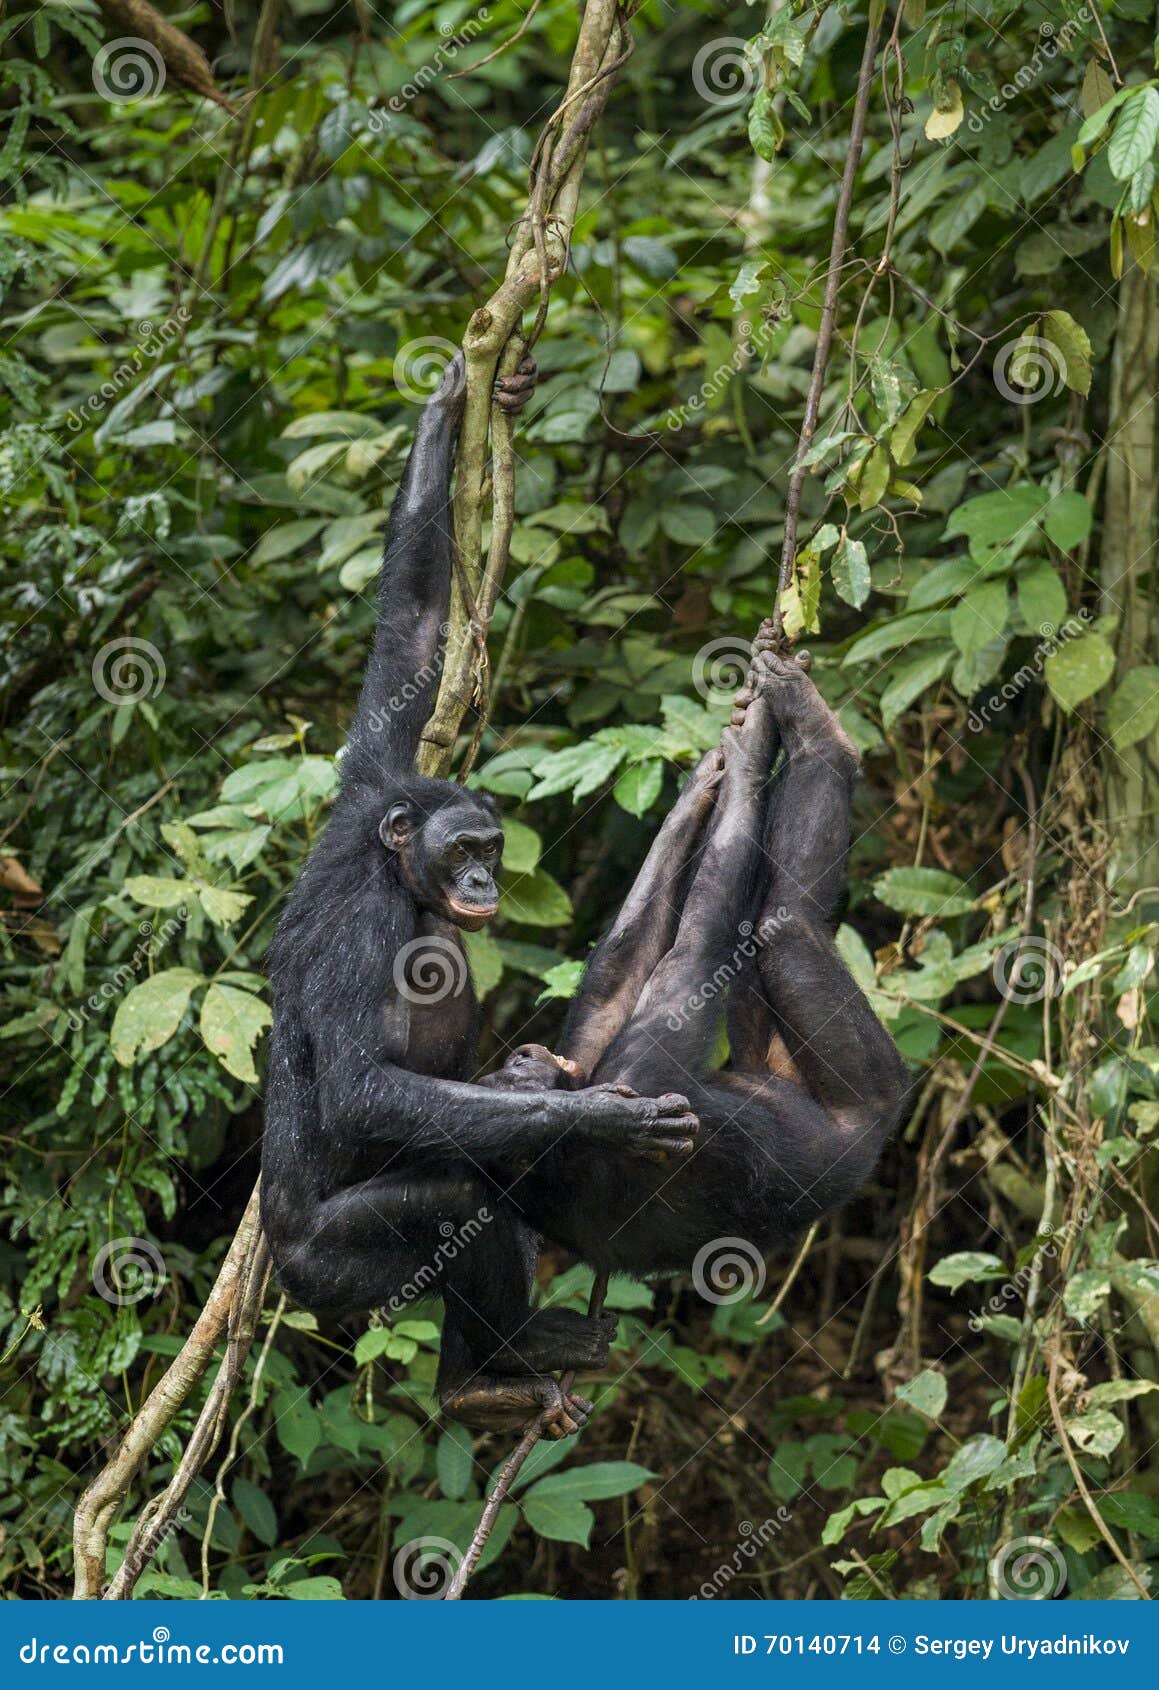 bonobos (pan paniscus) on a tree branch. green natural jungle background.